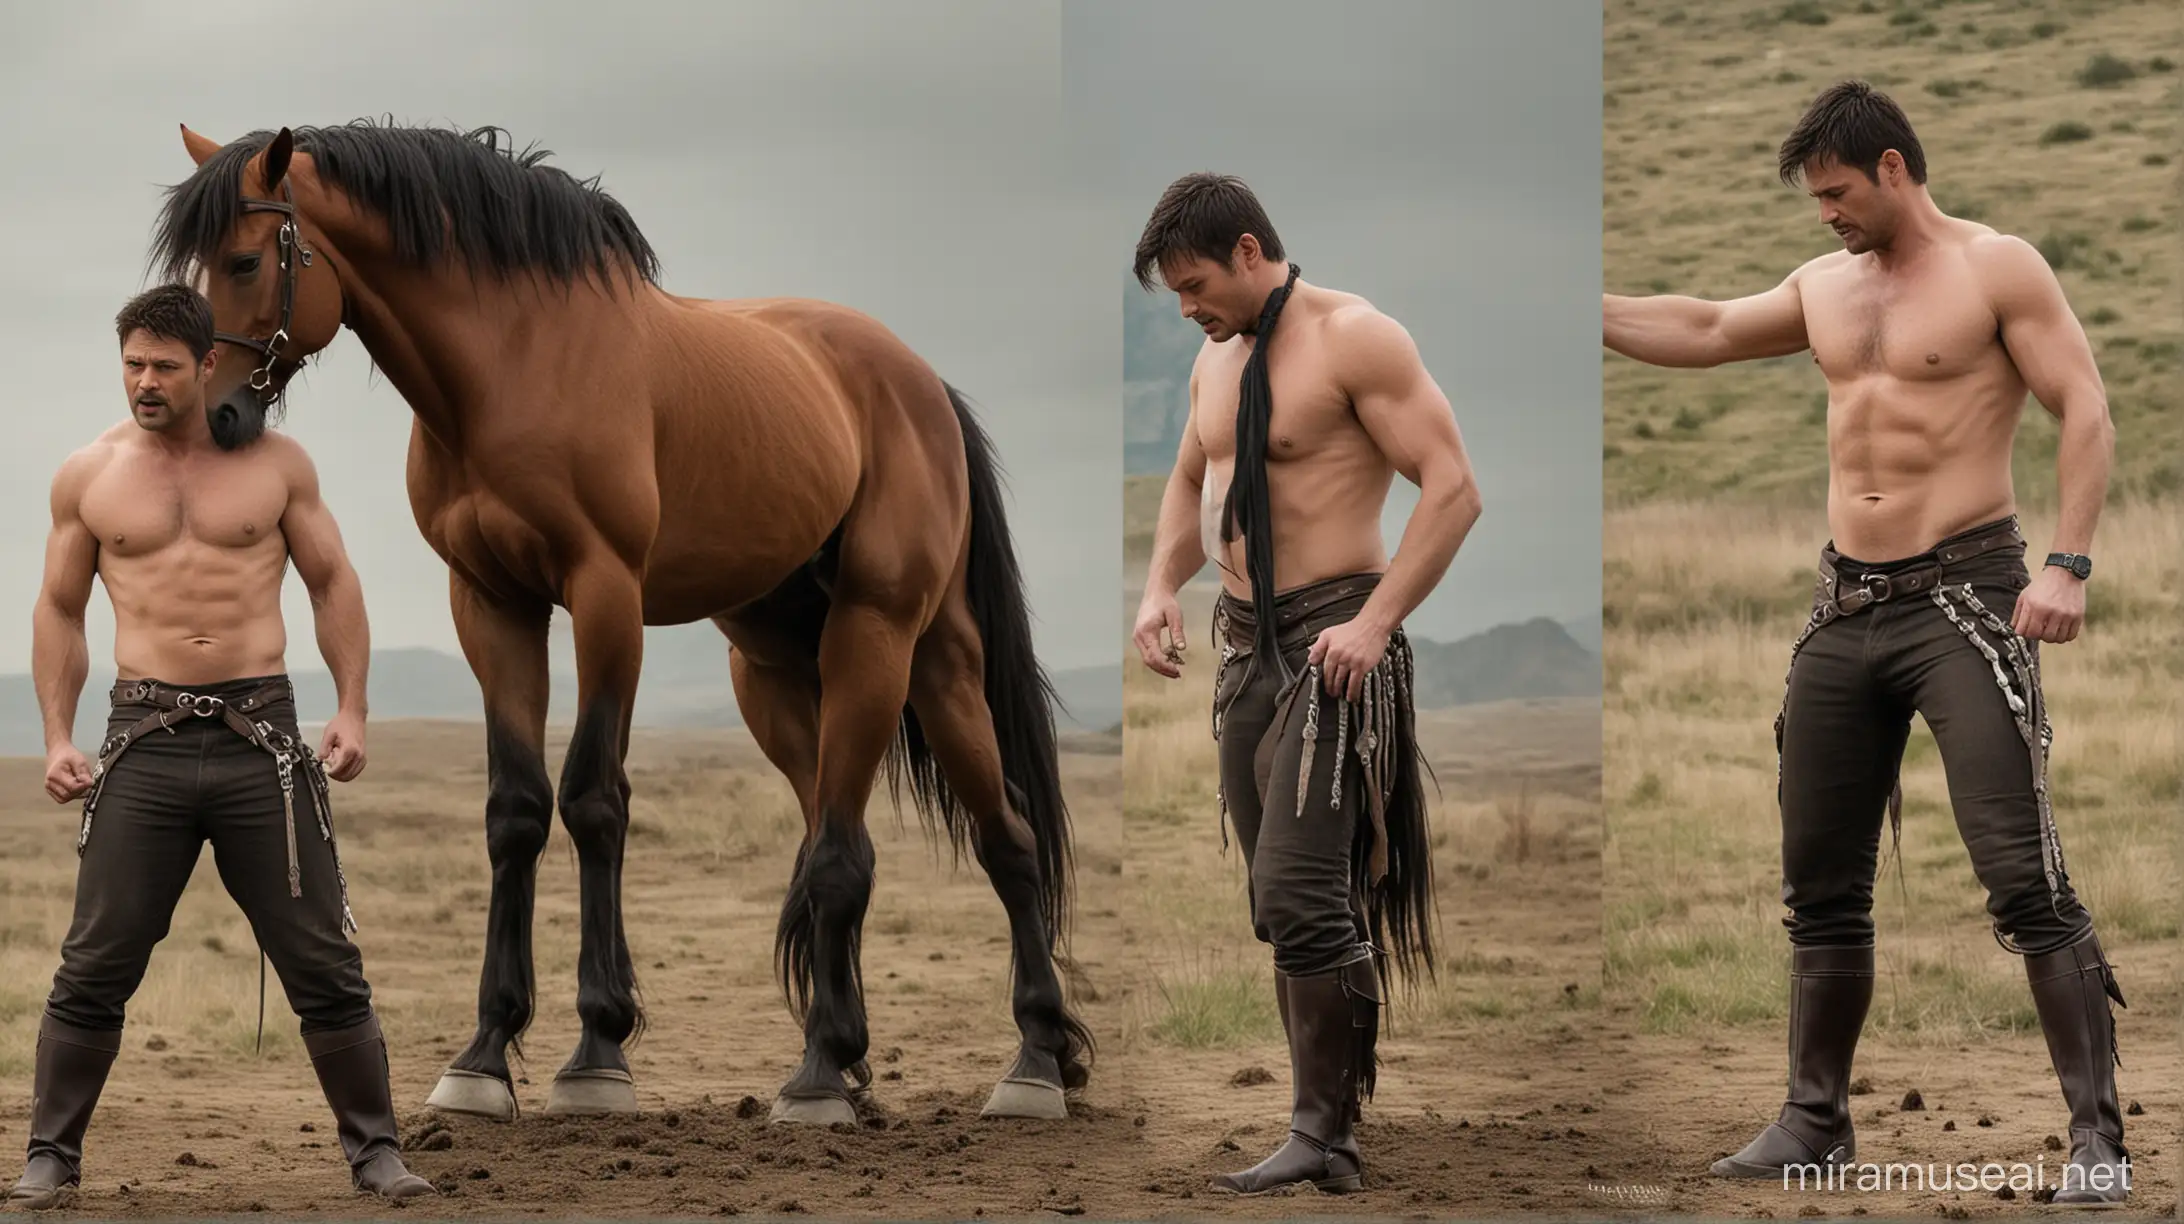 Karl Urban on all fours transforming into a horse. He has horse ears. He has horse legs. He has horse hooves. He has a horse tail. He has a complete horse body. And he's neighing like a horse. But his head is human.